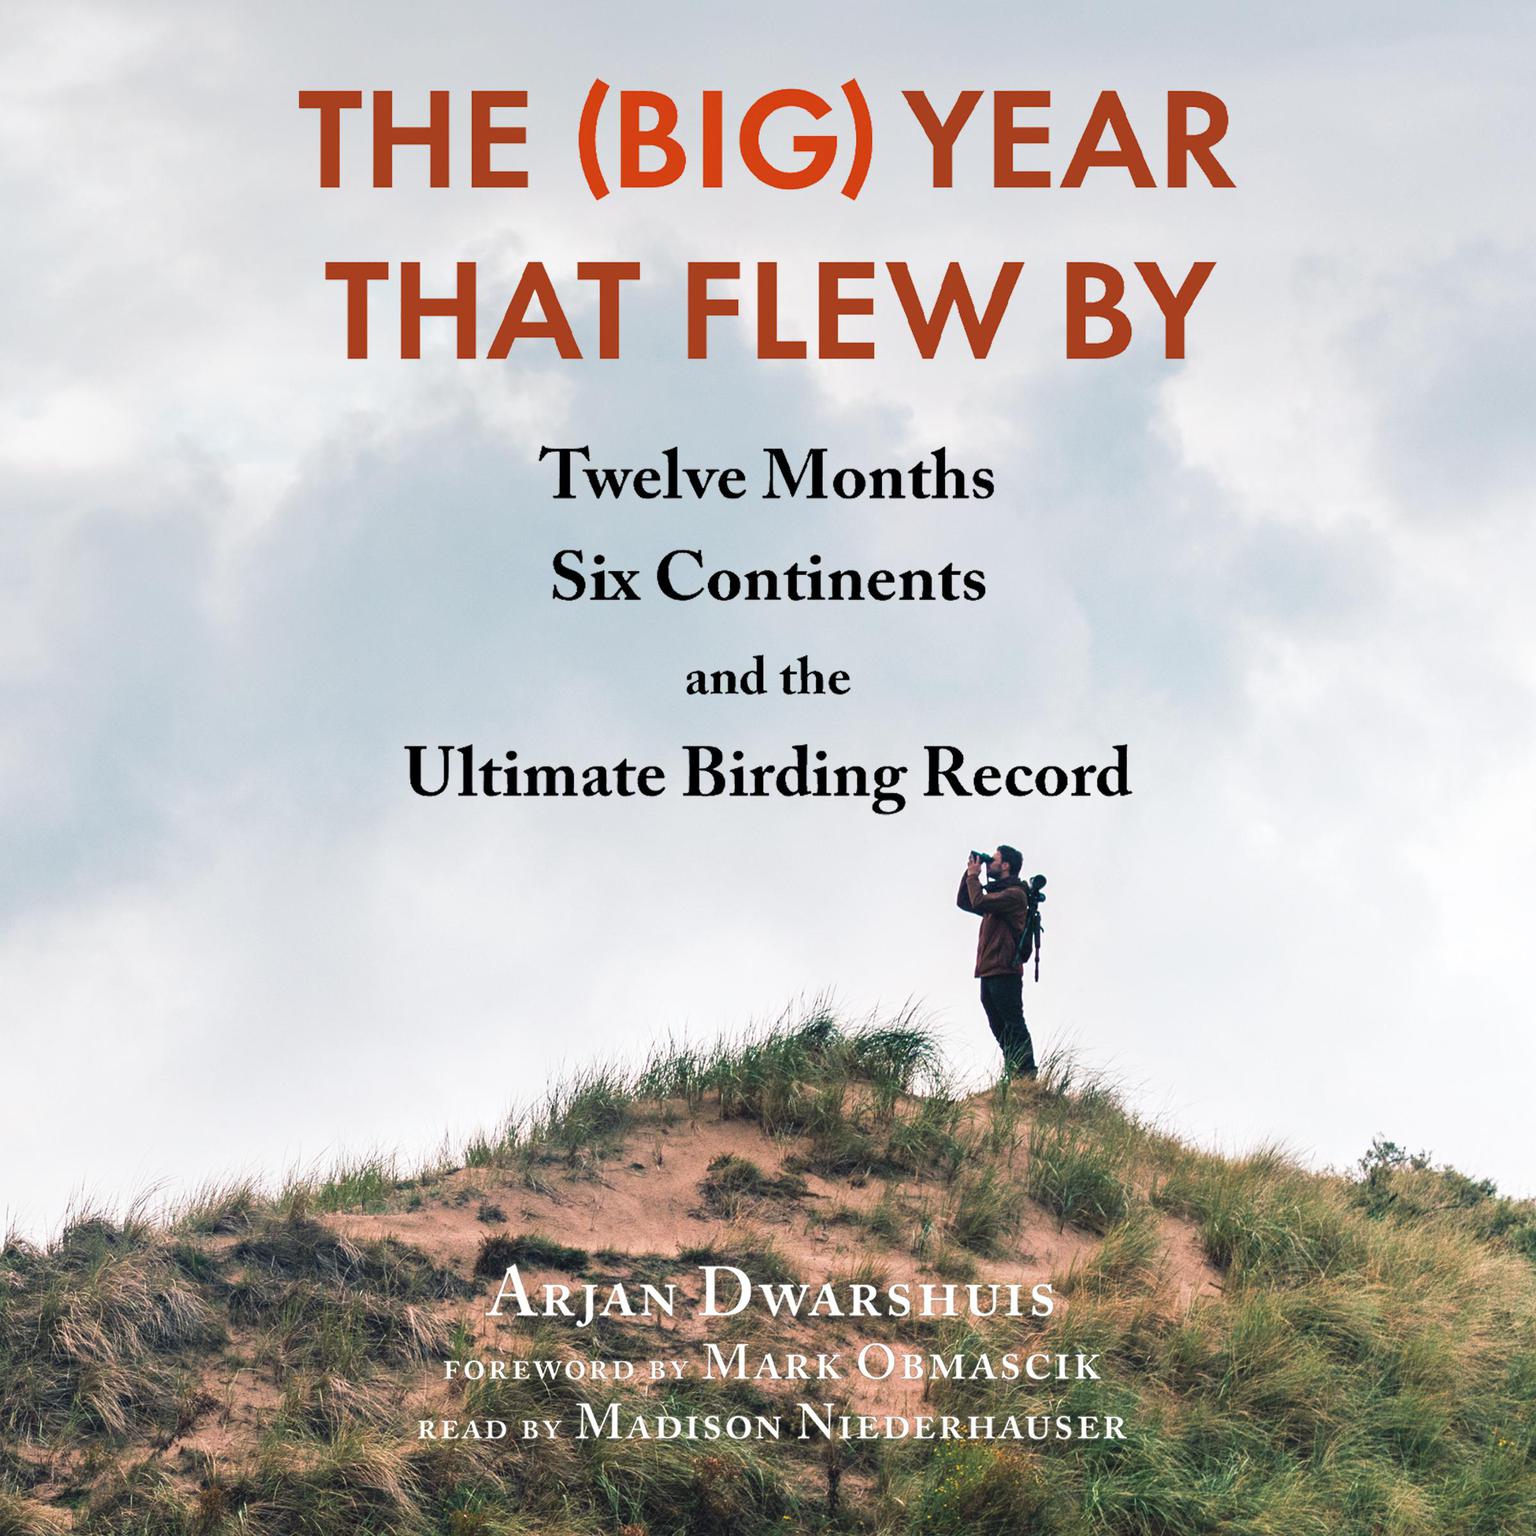 The (Big) Year That Flew By: Twelve Months, Six Continents, and the Ultimate Birding Record Audiobook, by Arjan Dwarshuis